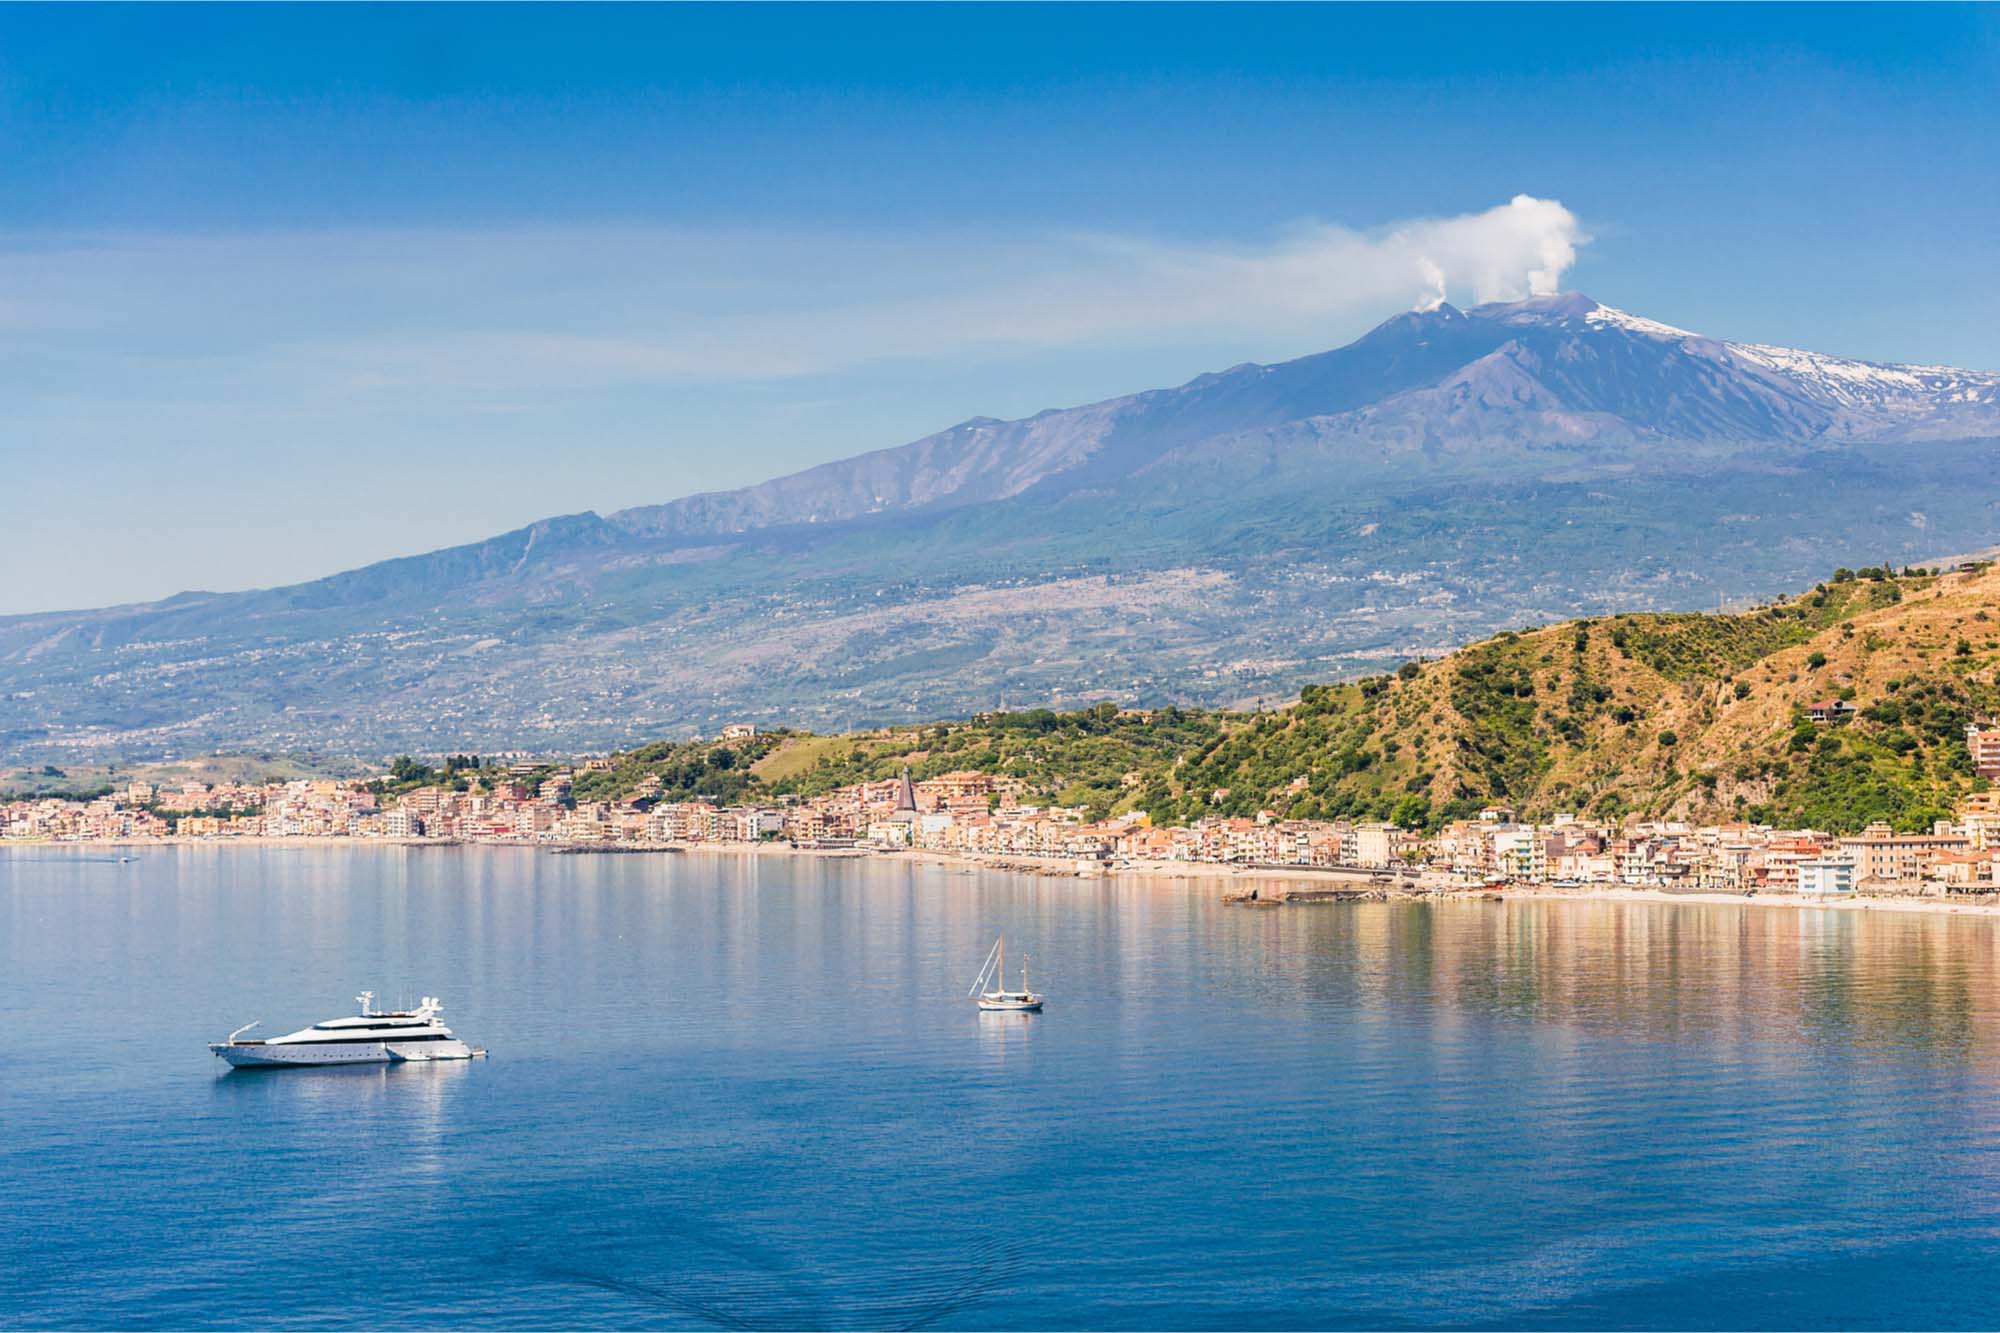 Mount Etna towering near the coast and ocean